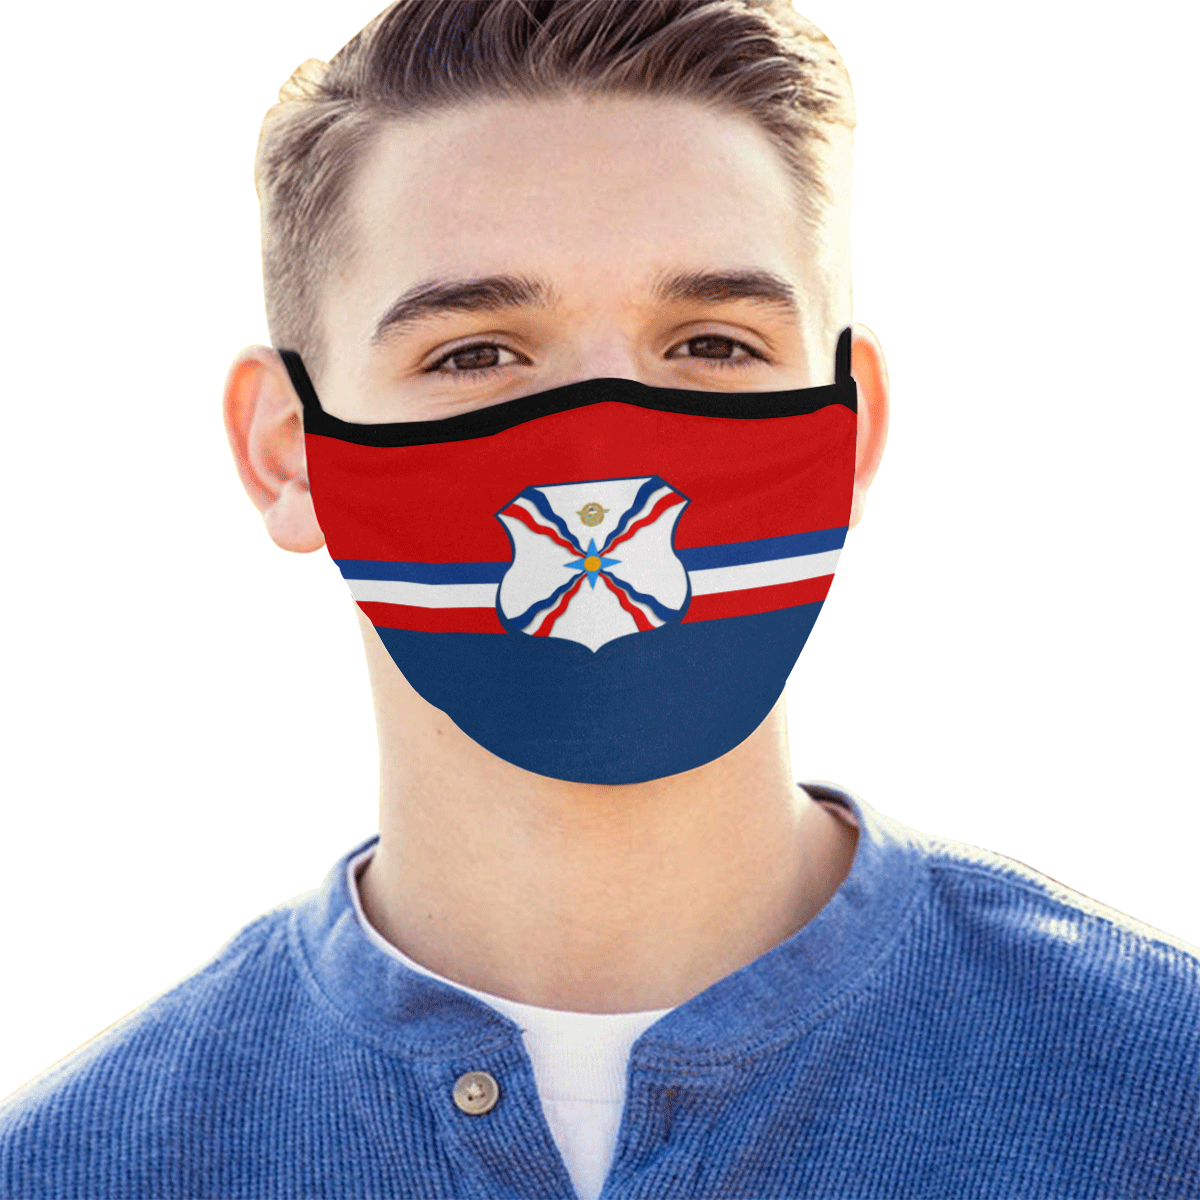 The Flag of Atour Mouth Mask